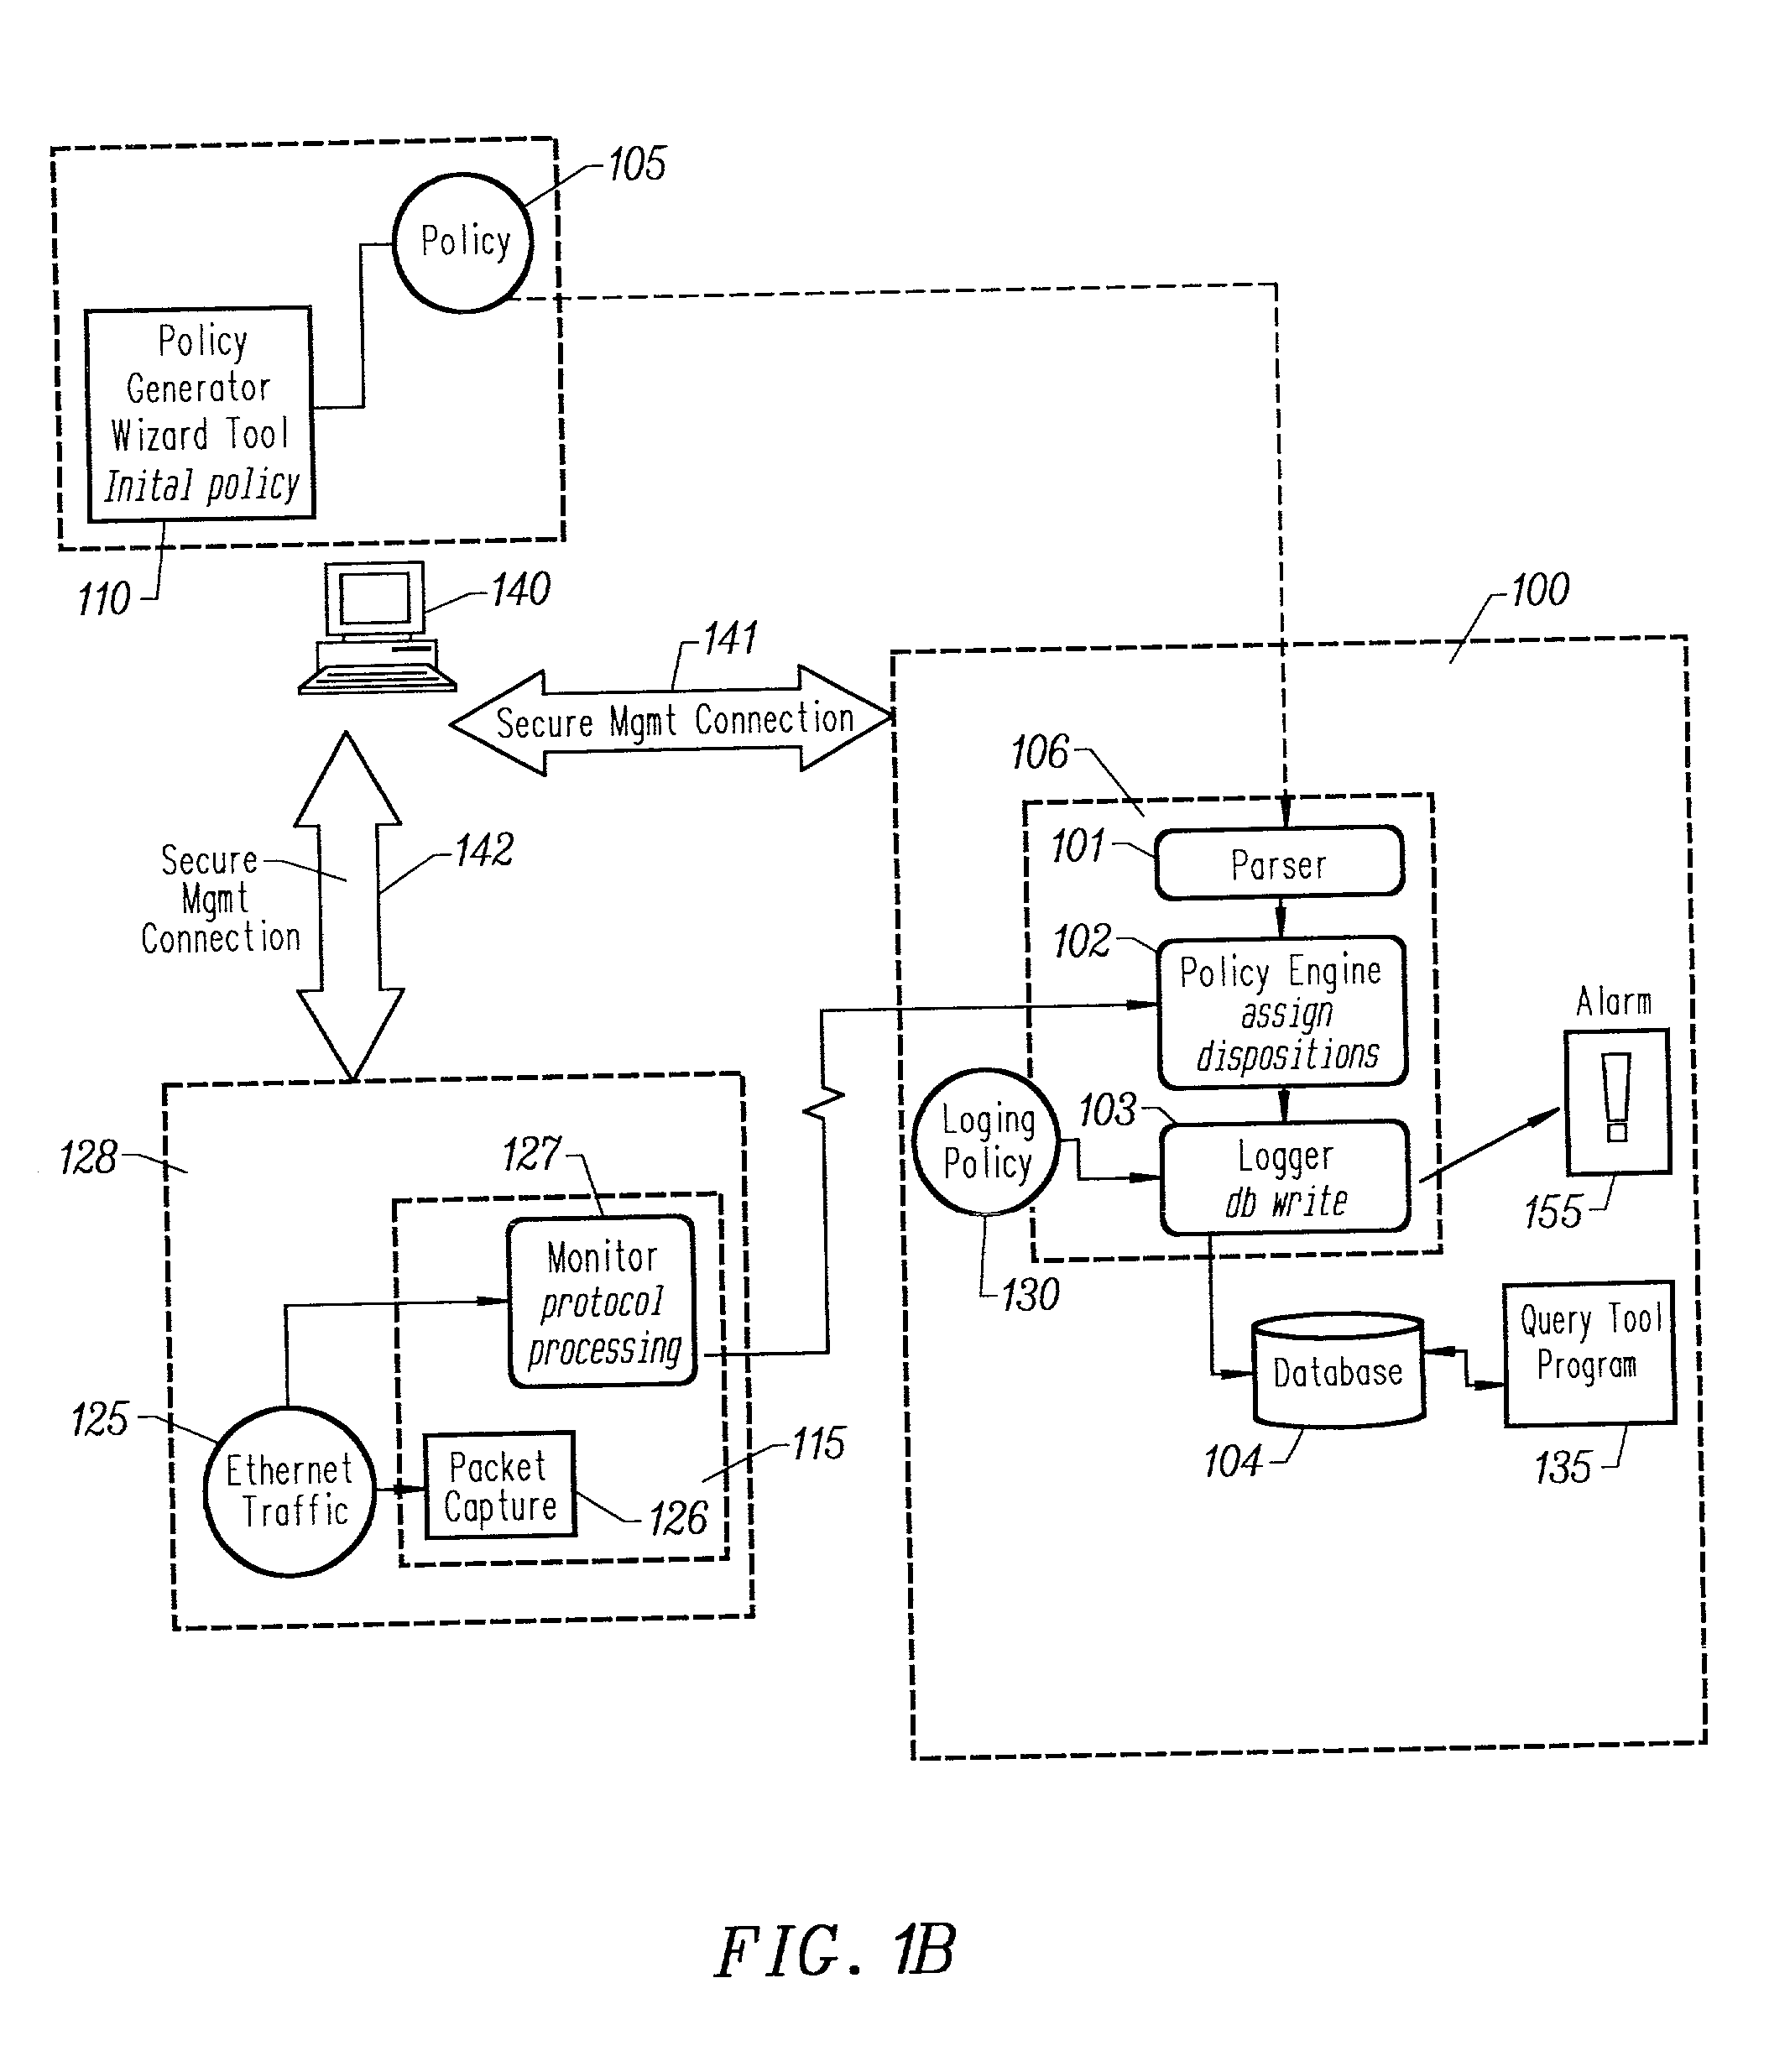 Automated generation of an english language representation of a formal network security policy